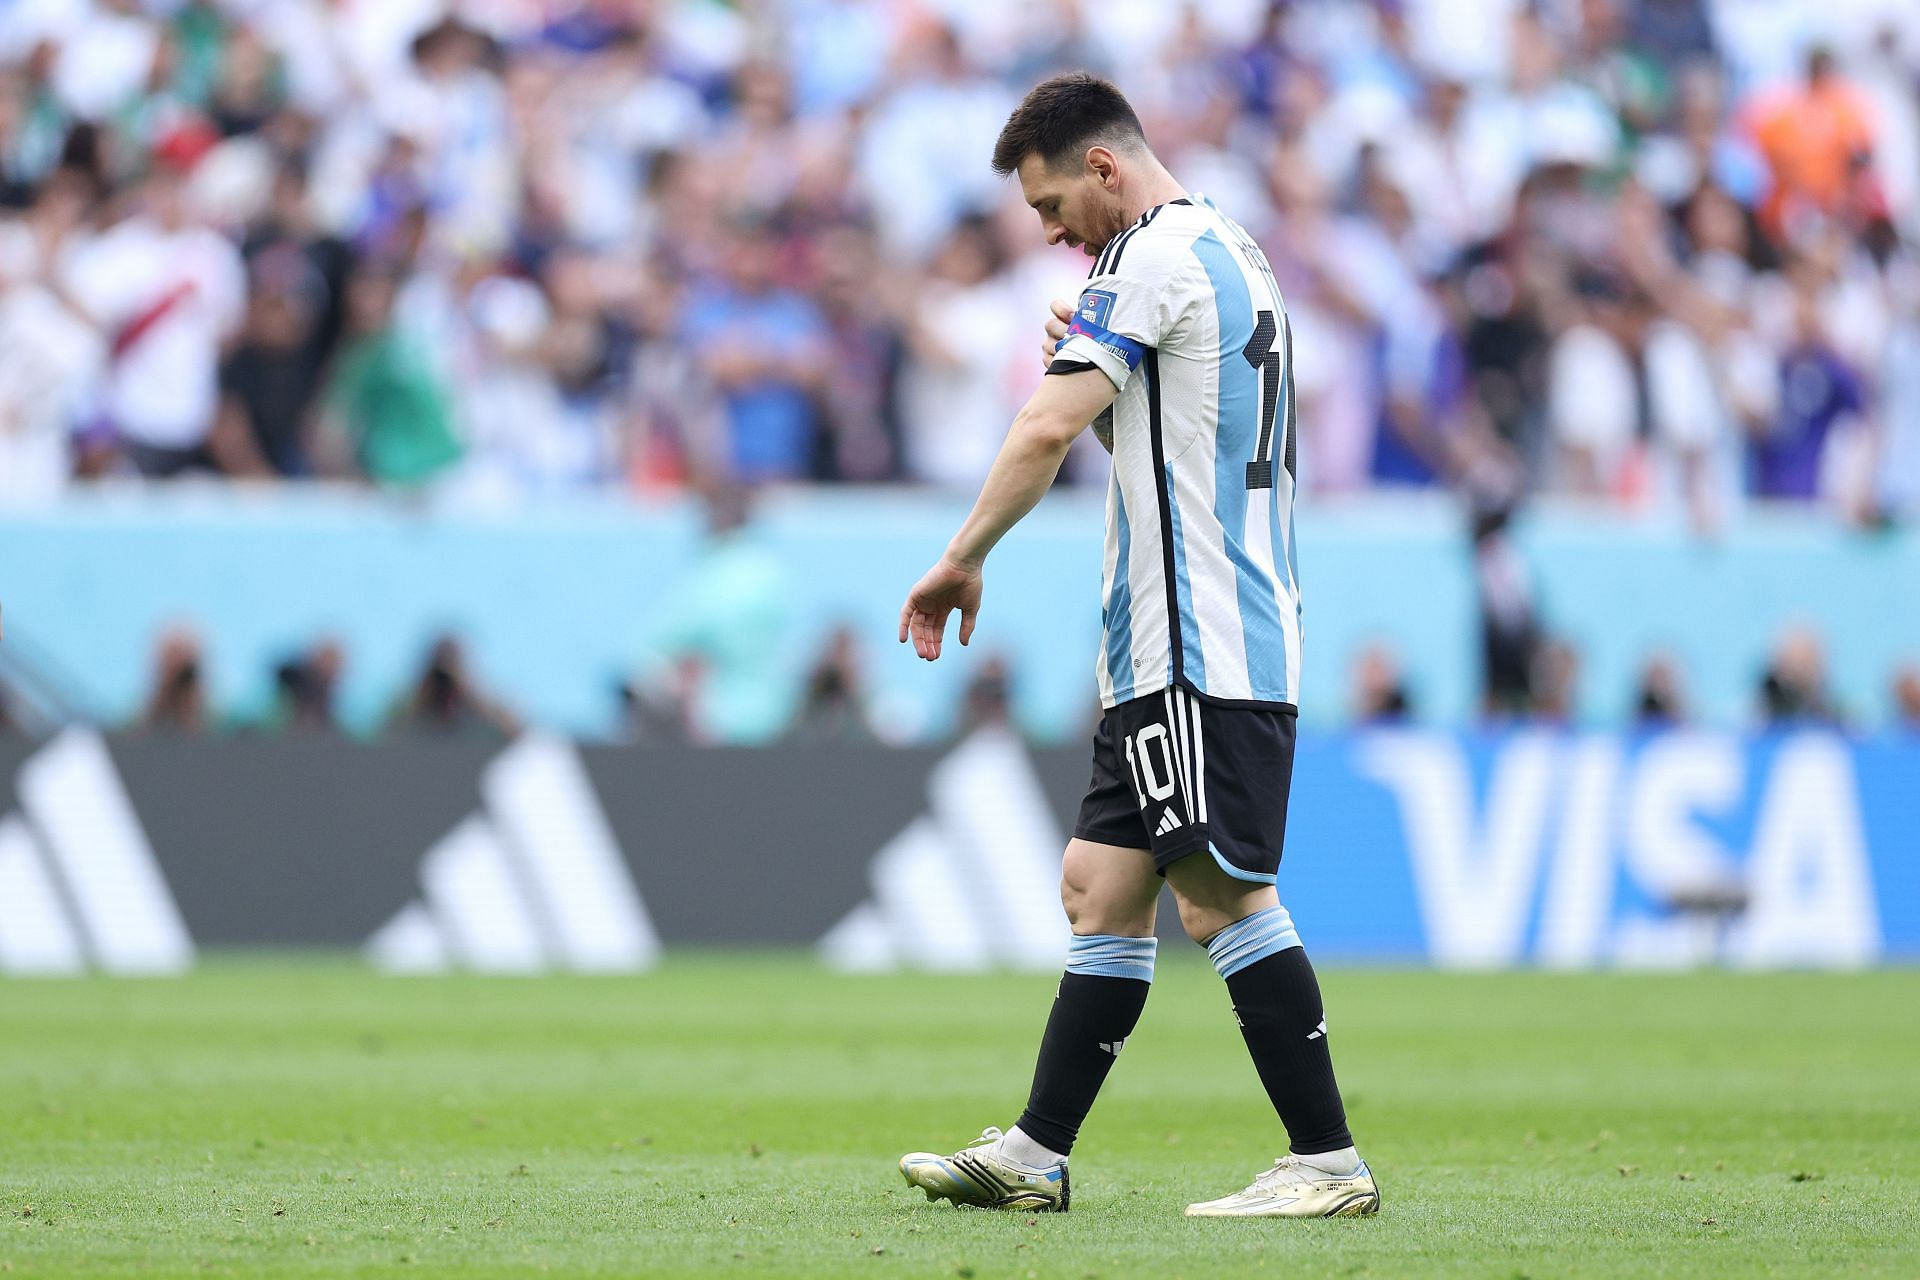 Messi's early opener did not prove to be enough for Argentina in their game against Saudi Arabia